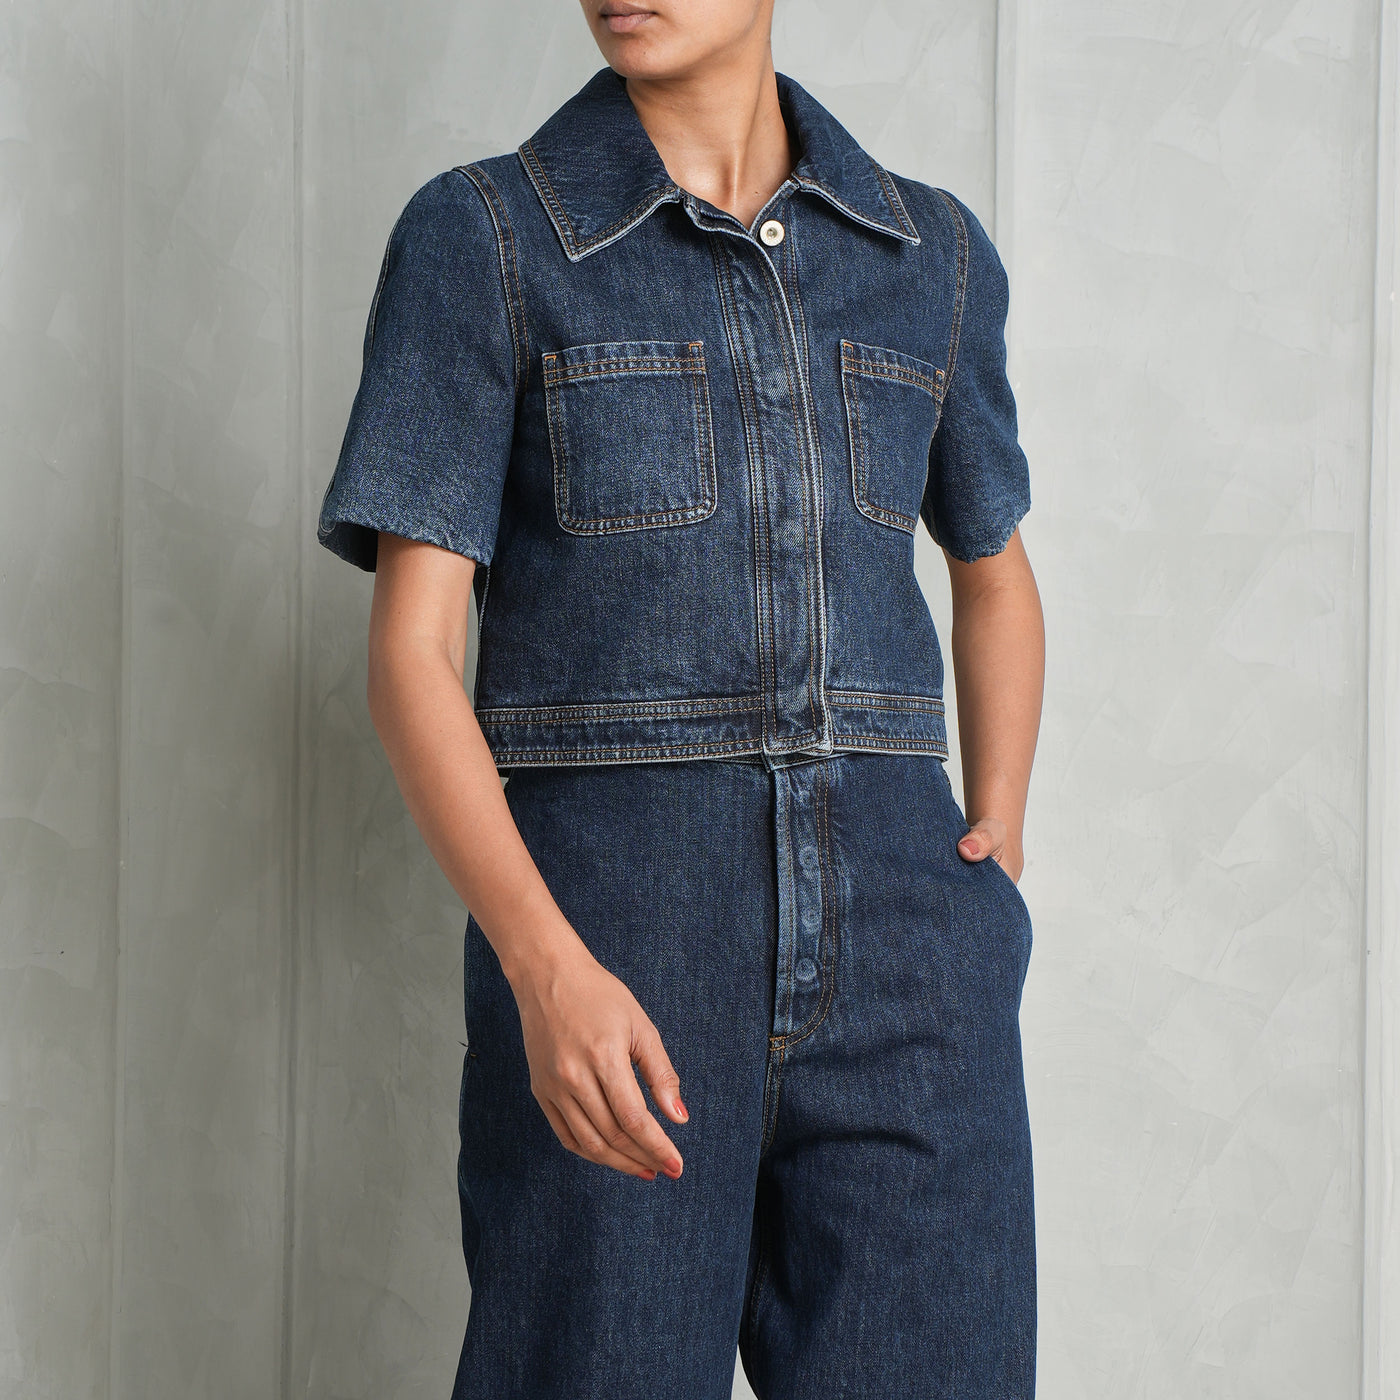 LOEWE Reapportioned denim shirt set with pockets